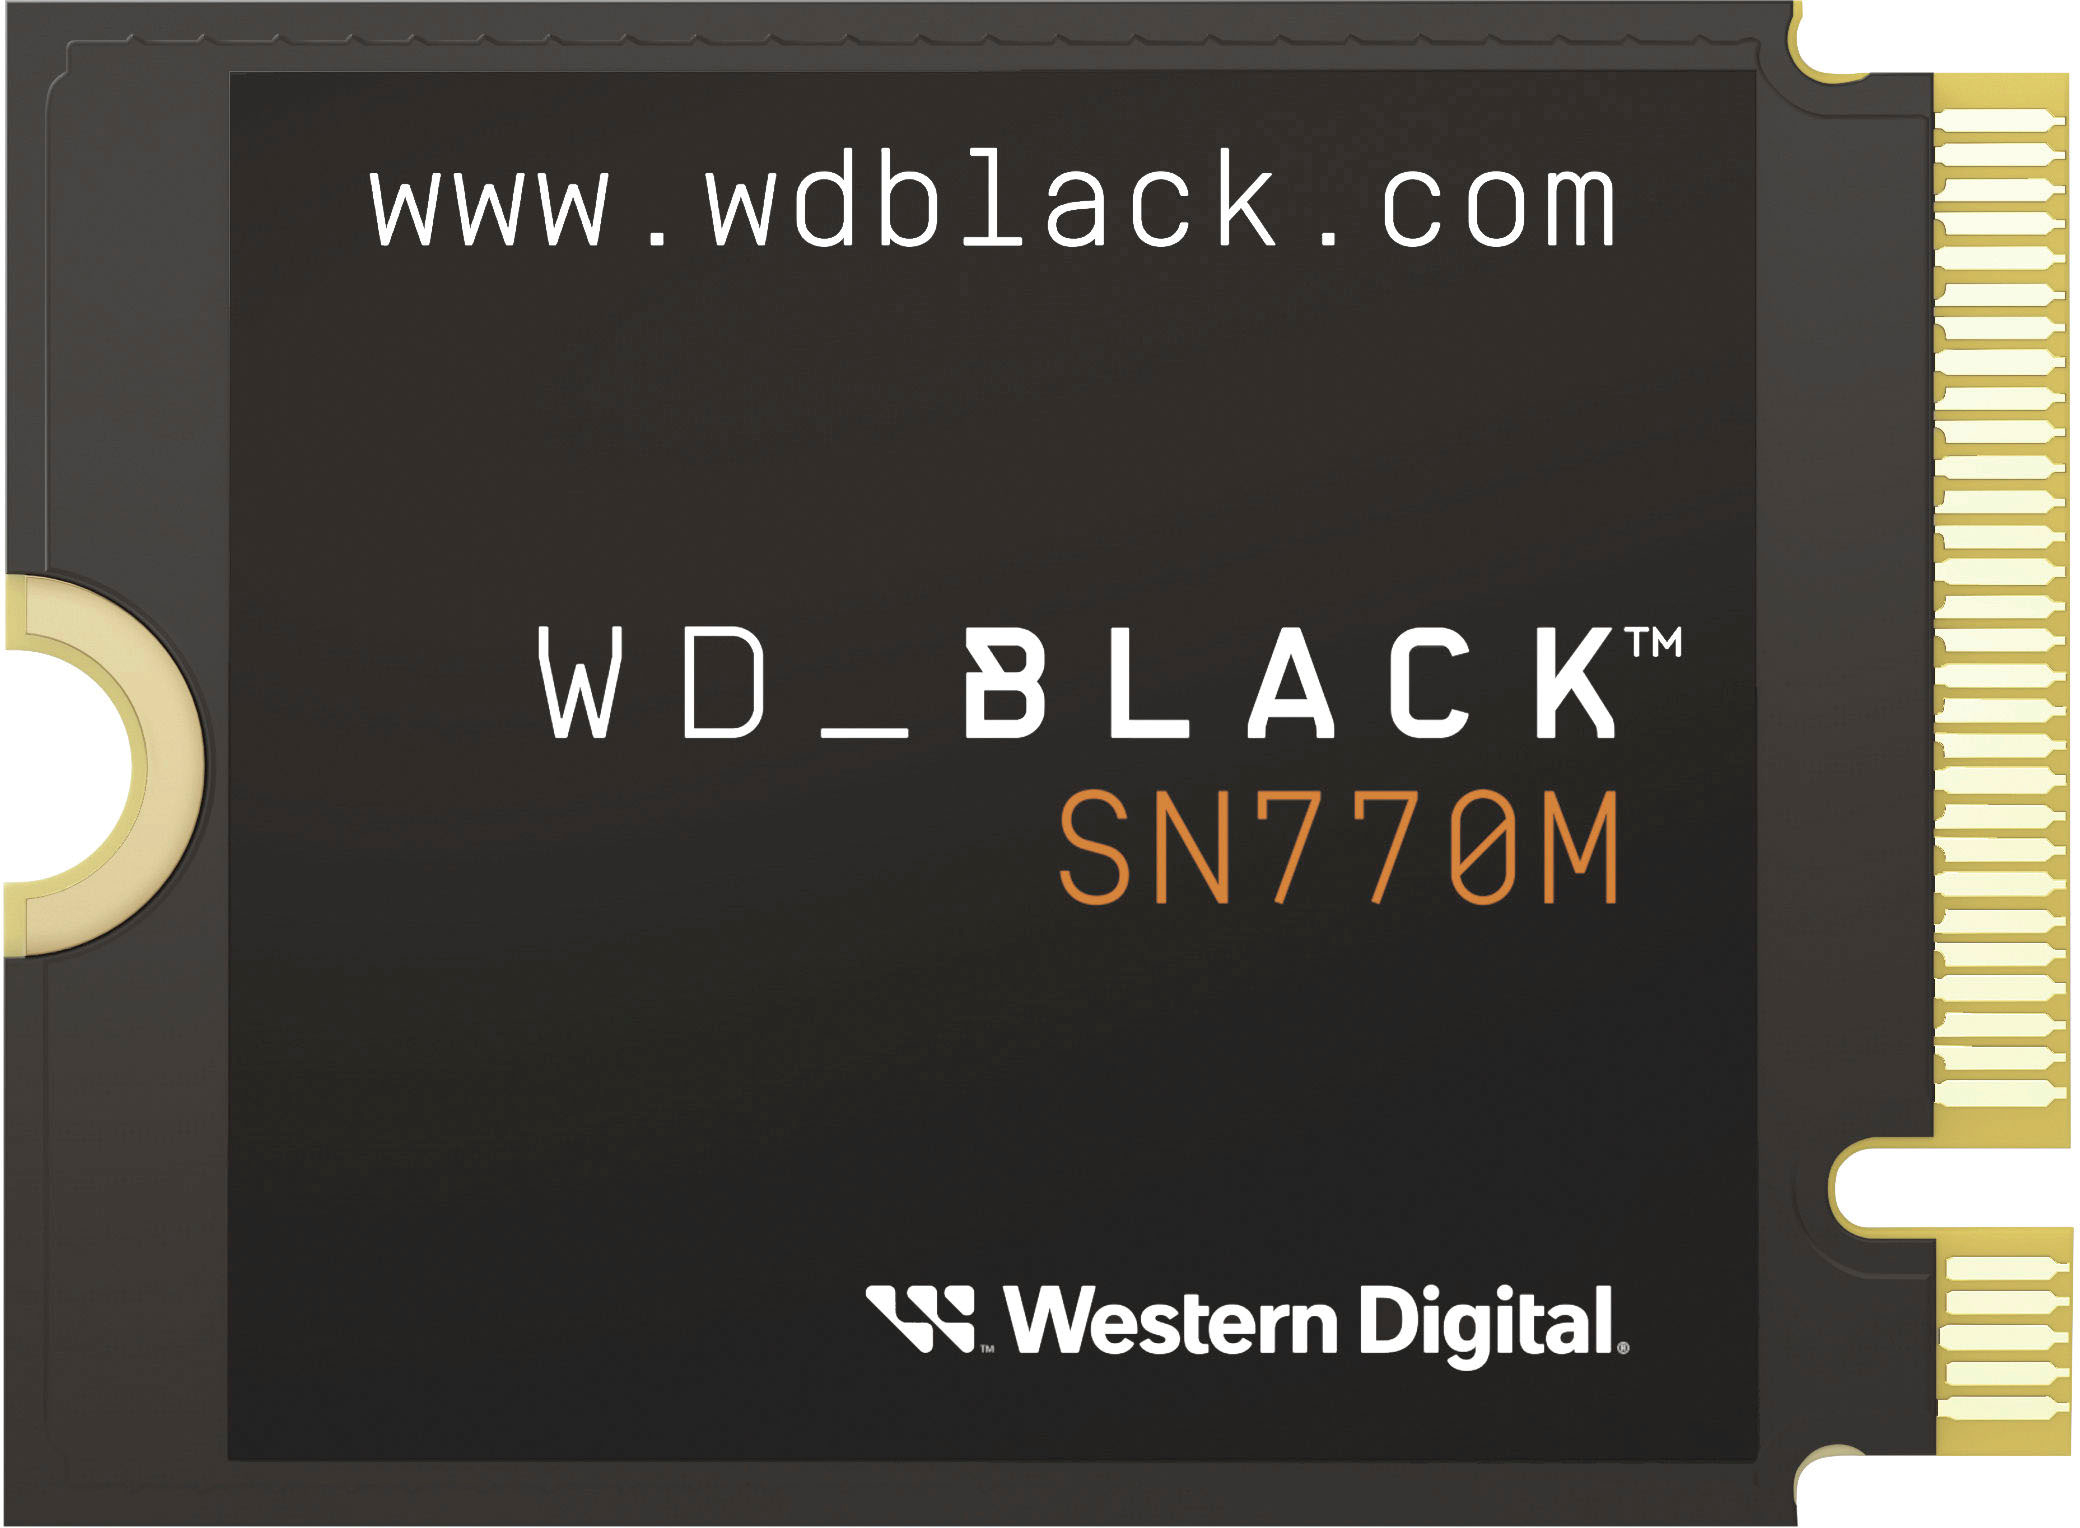 WD_BLACK SN770 1 To - SSD - Top Achat